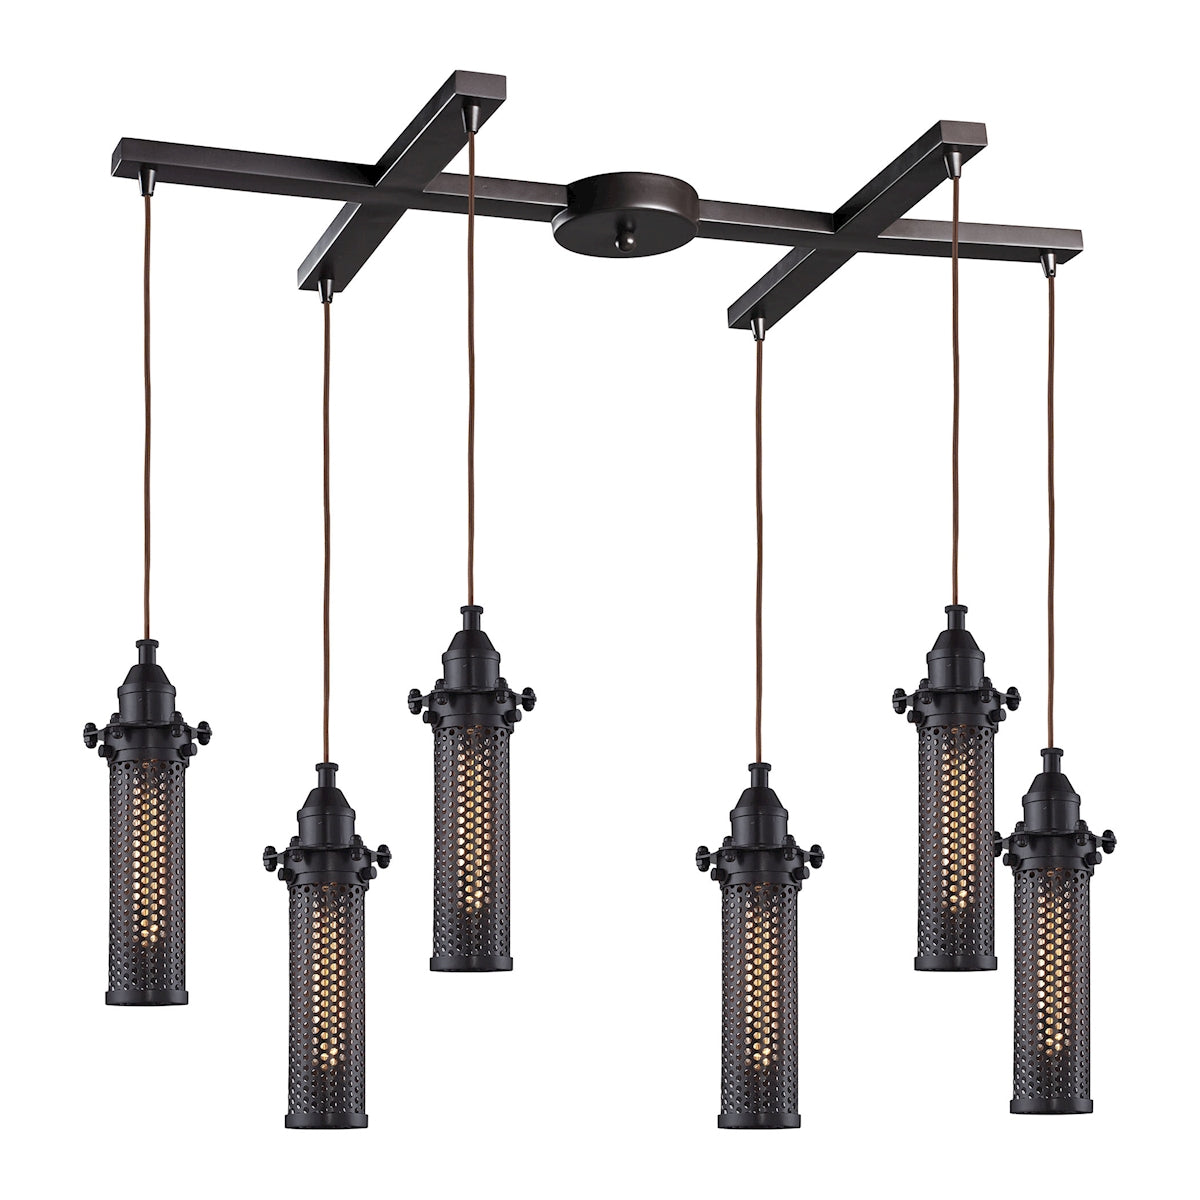 ELK Lighting 66325/6 Fulton 6-Light H-Bar Pendant Fixture in Oil Rubbed Bronze with Perforated Metal Shade